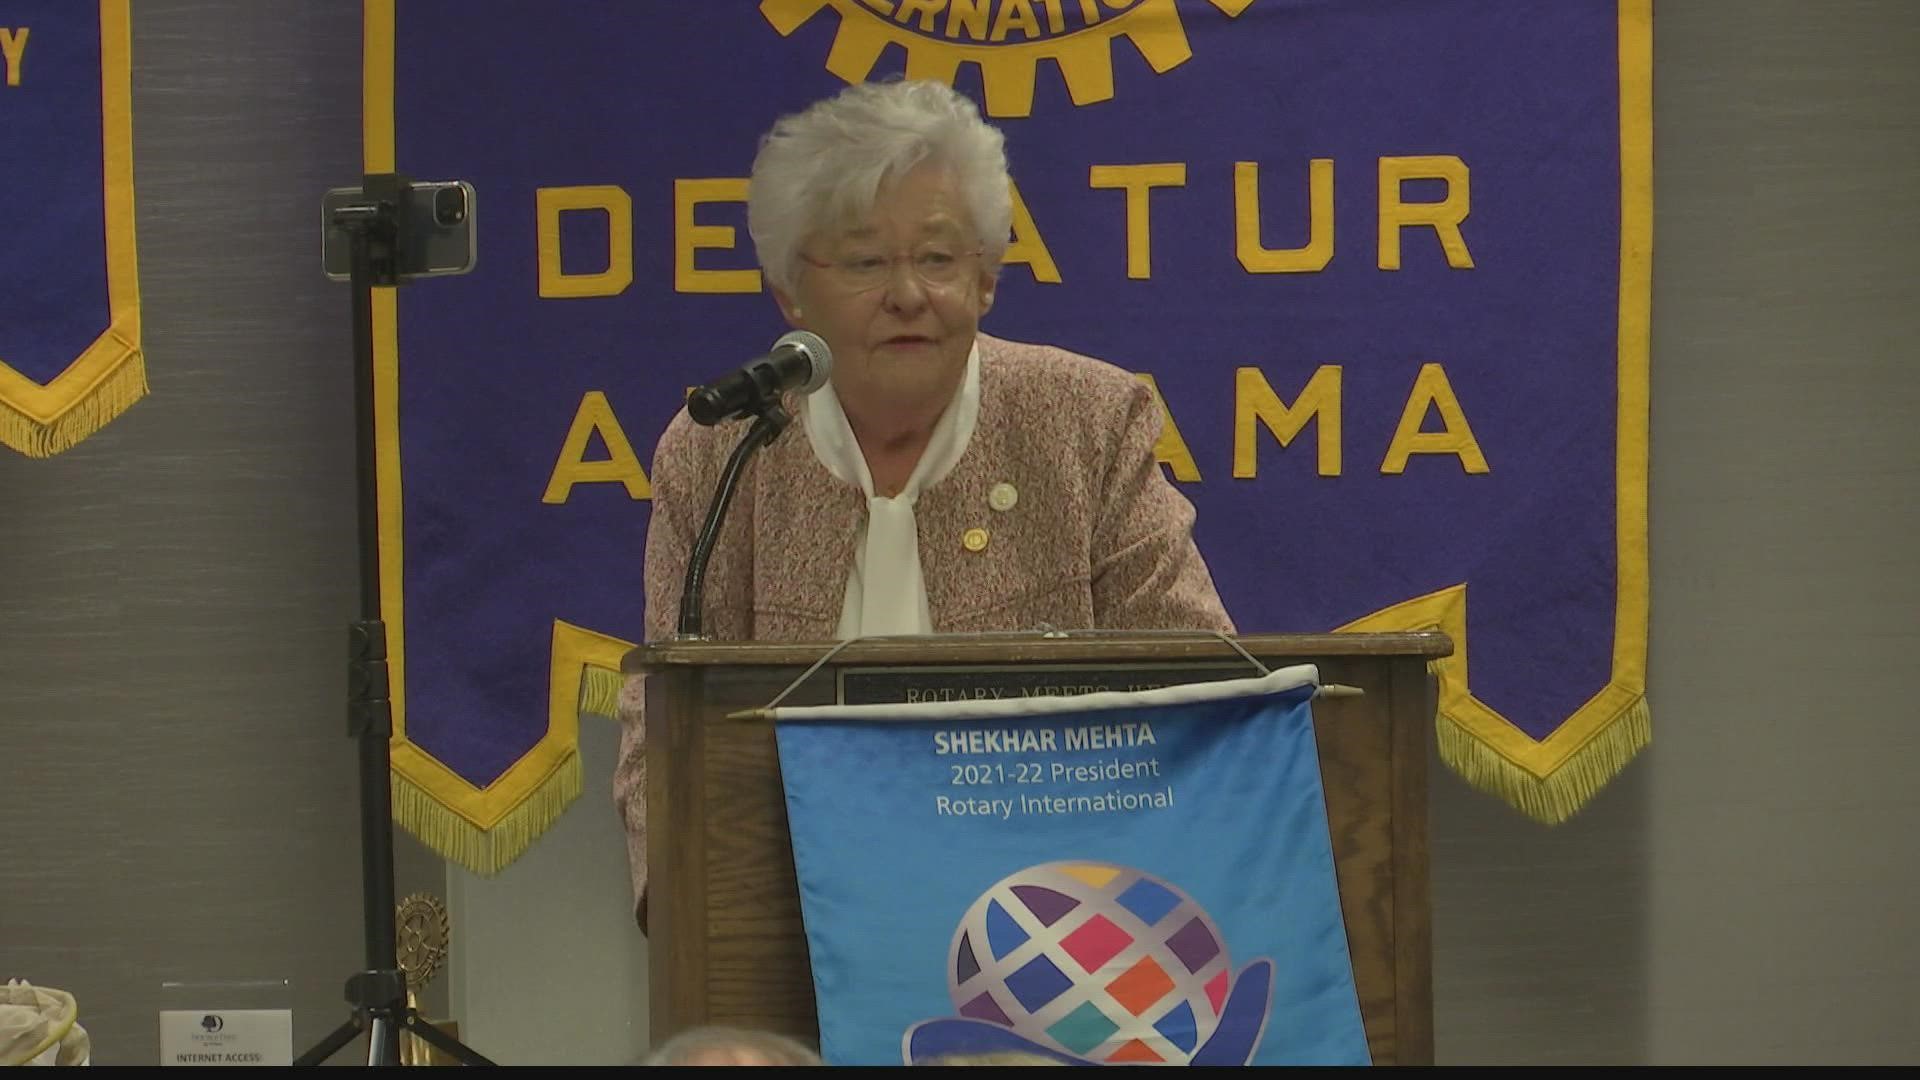 Governor Kay Ivey gives an update on 'Rebuild Alabama' and its impact on the state's infrastructure.